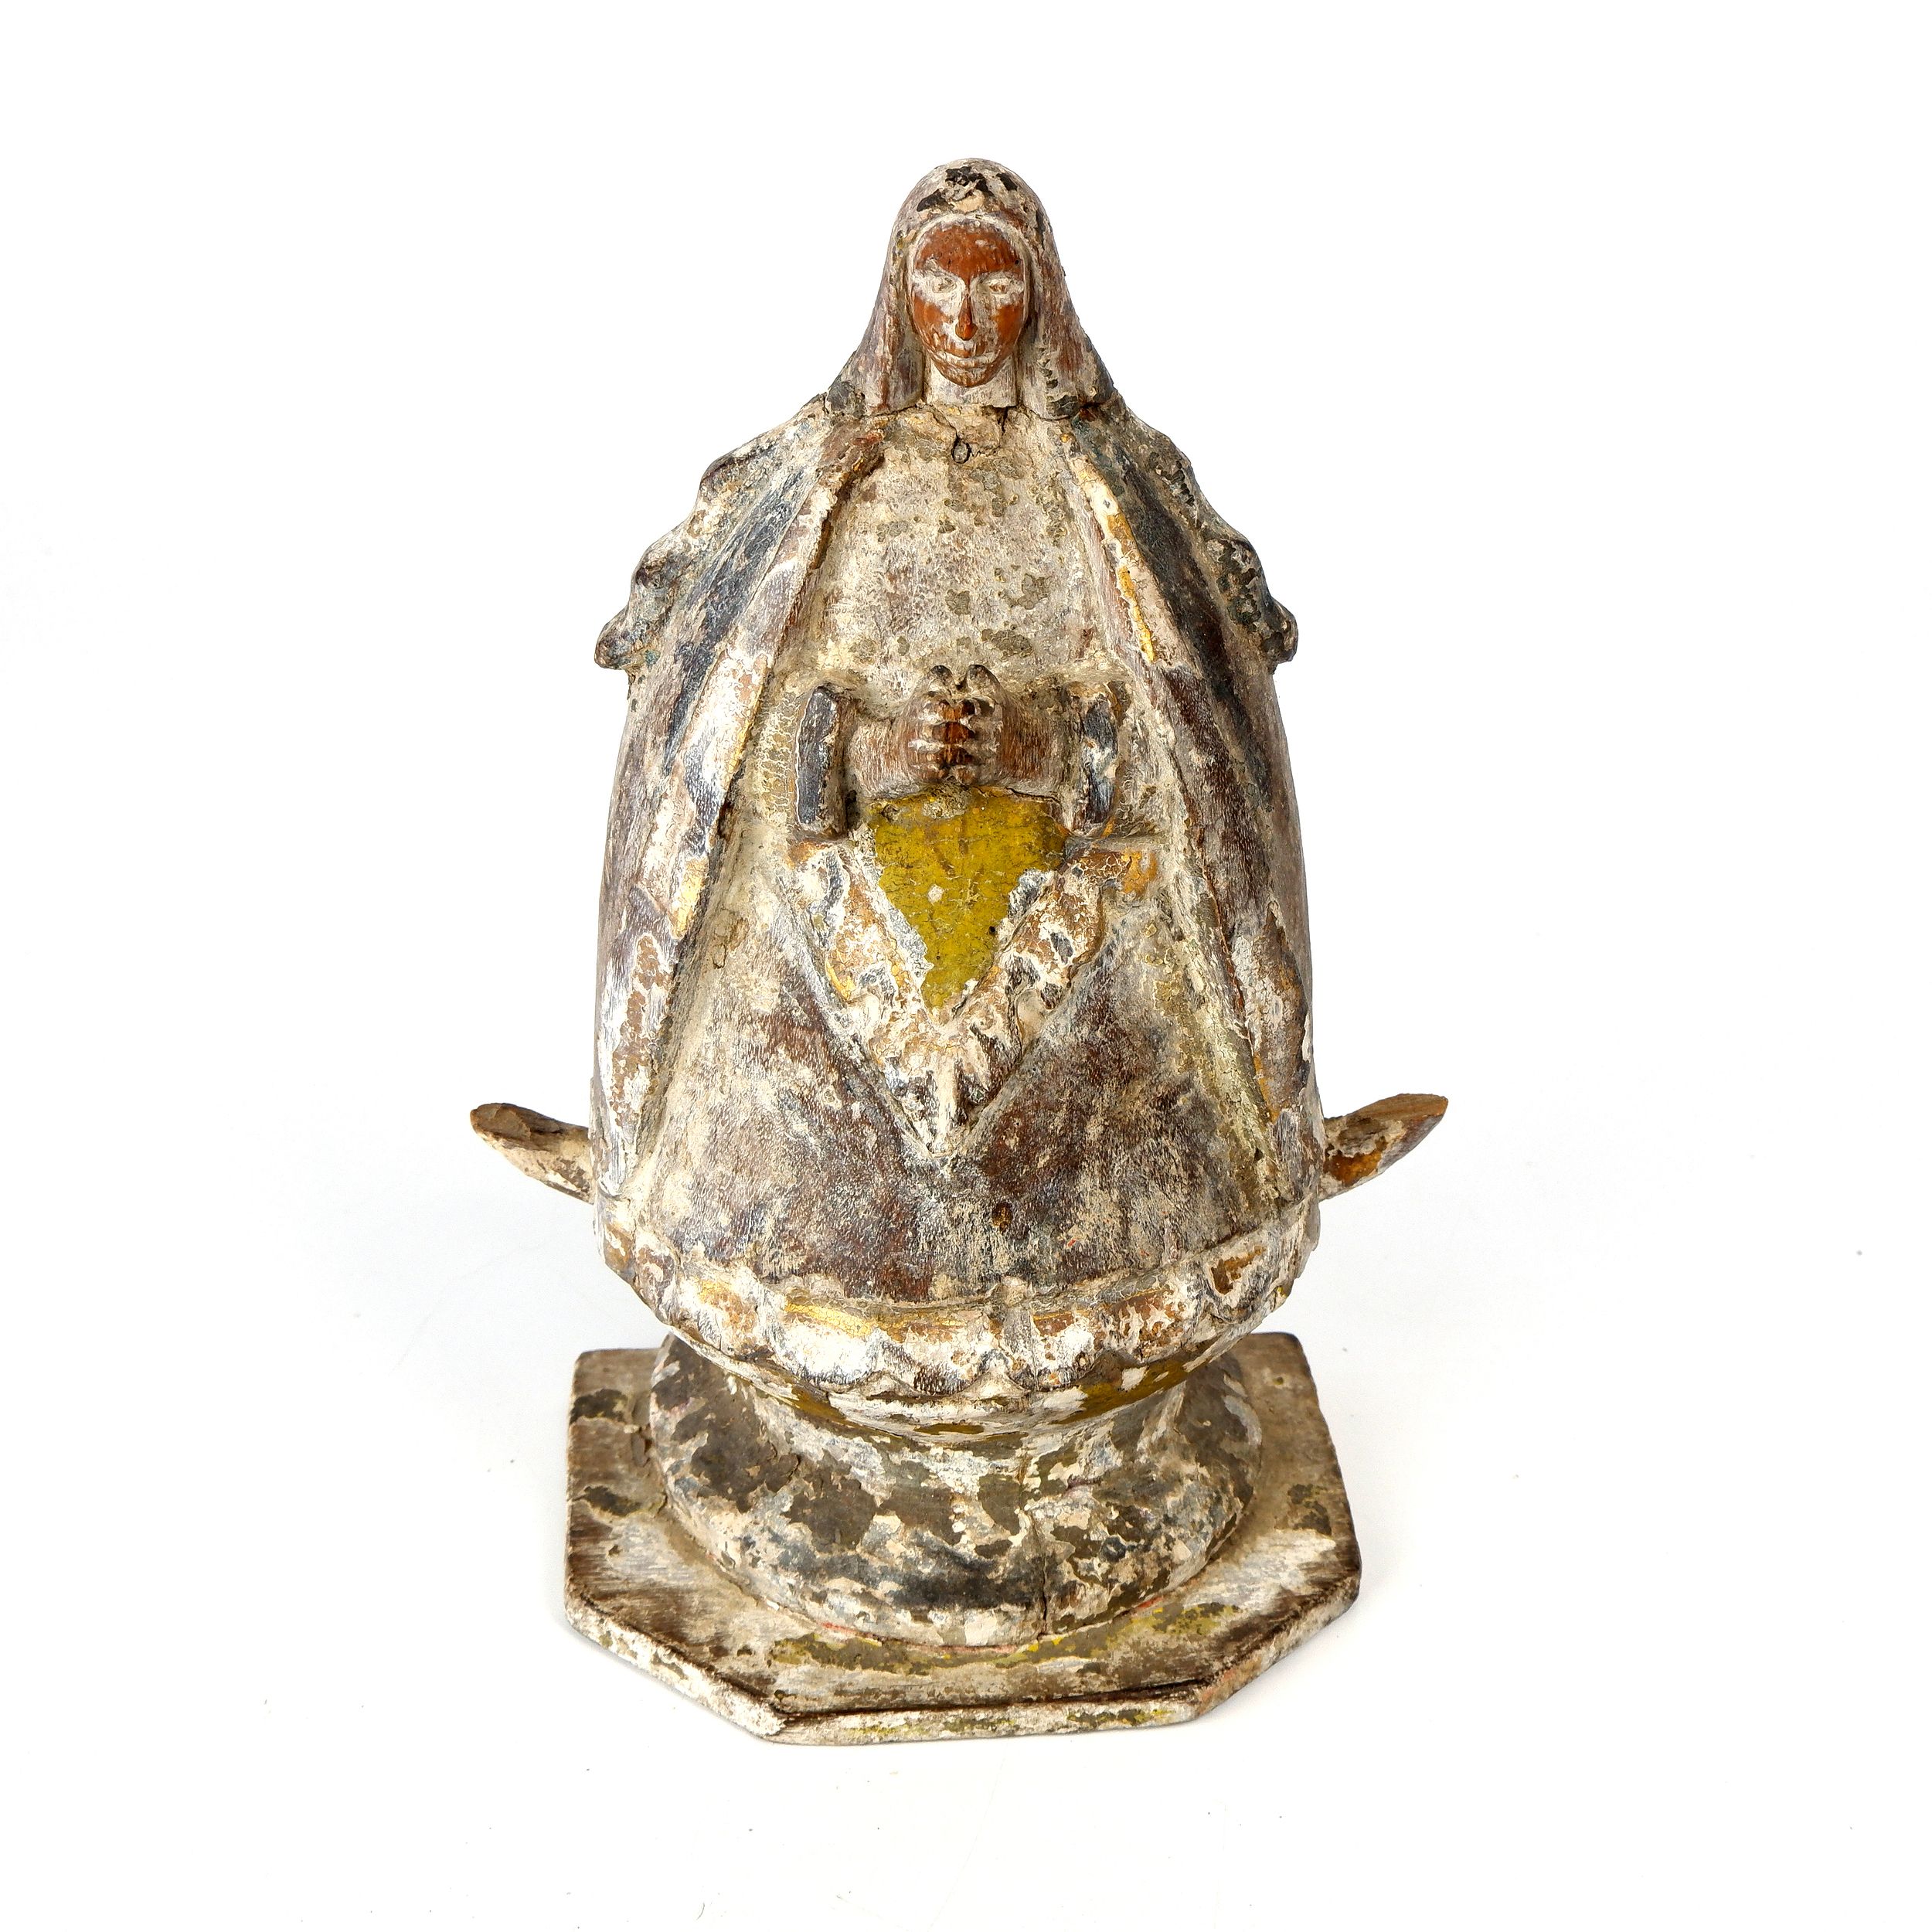 'Antique Philippino Hand Carved and Painted Santos Figure of the Virgin Mary, Late 19th to Early 20th Century'